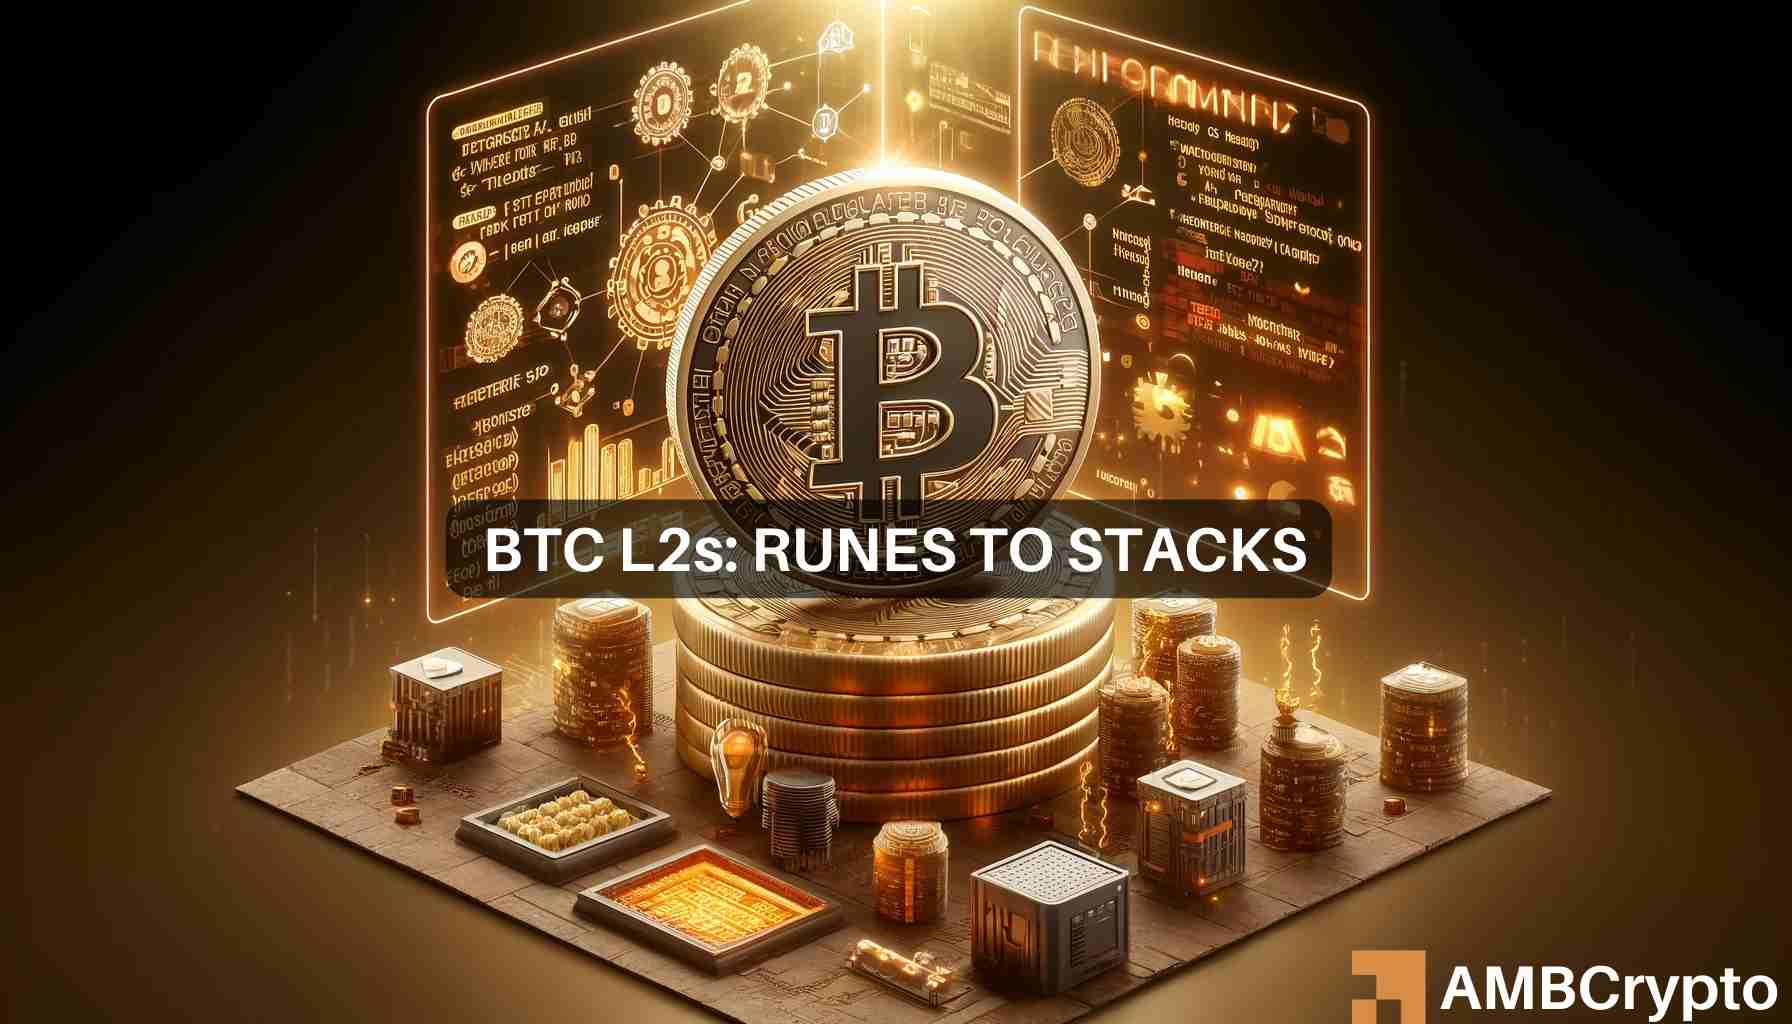  After Runes, how will Stacks' Nakamoto help BTC?